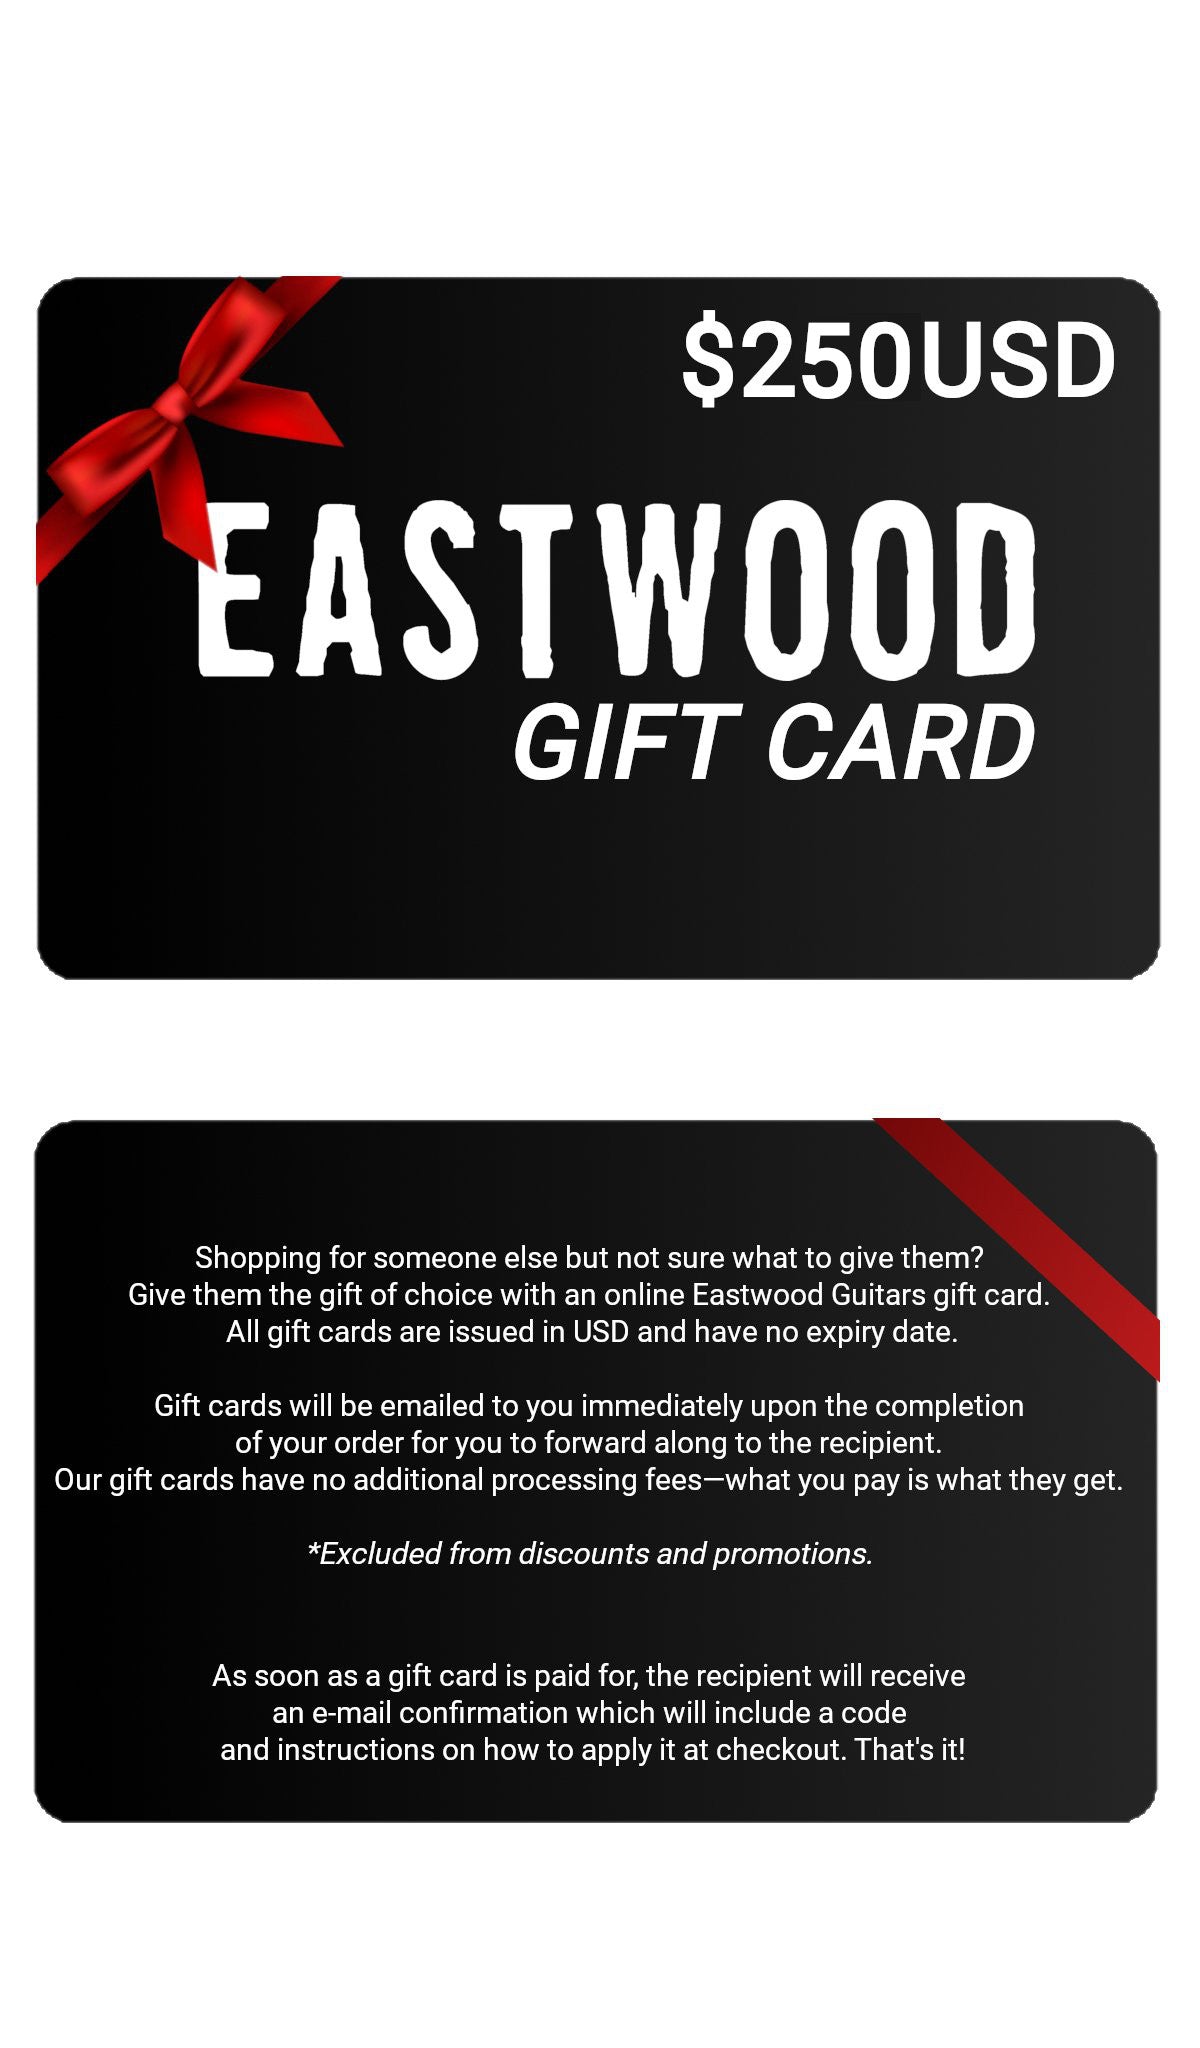 Eastwood Gift Cards $250